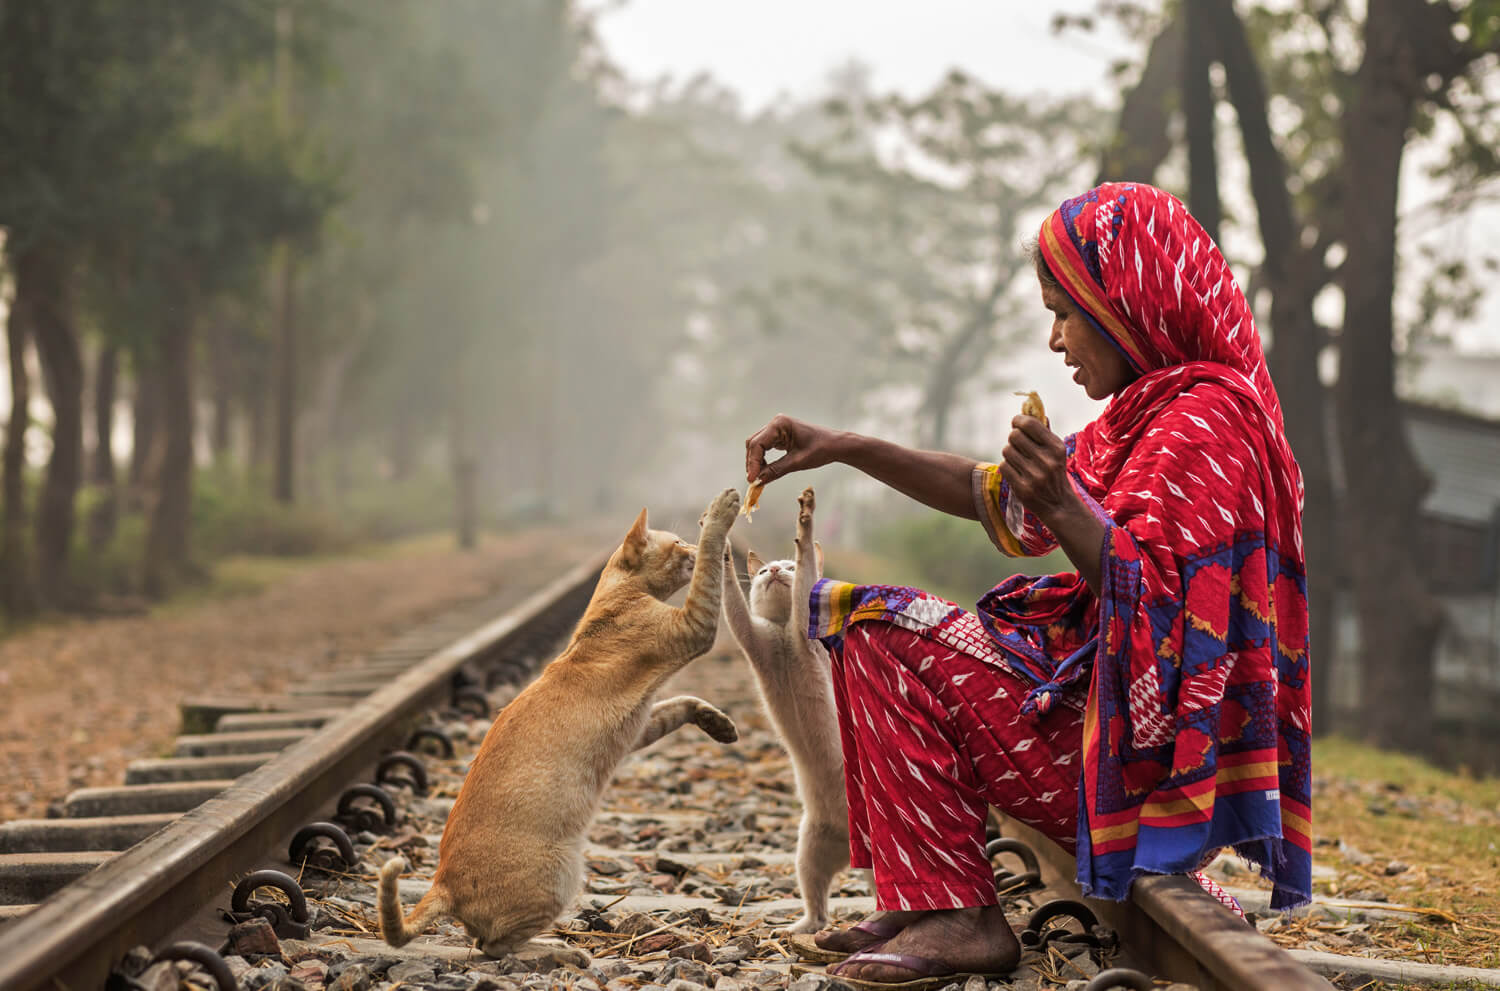 A woman in a vibrant red and blue sari sits on railway tracks as she shares food with two attentive cats amidst a hazy, tree-lined backdrop, creating a serene yet engaging scene of companionship.